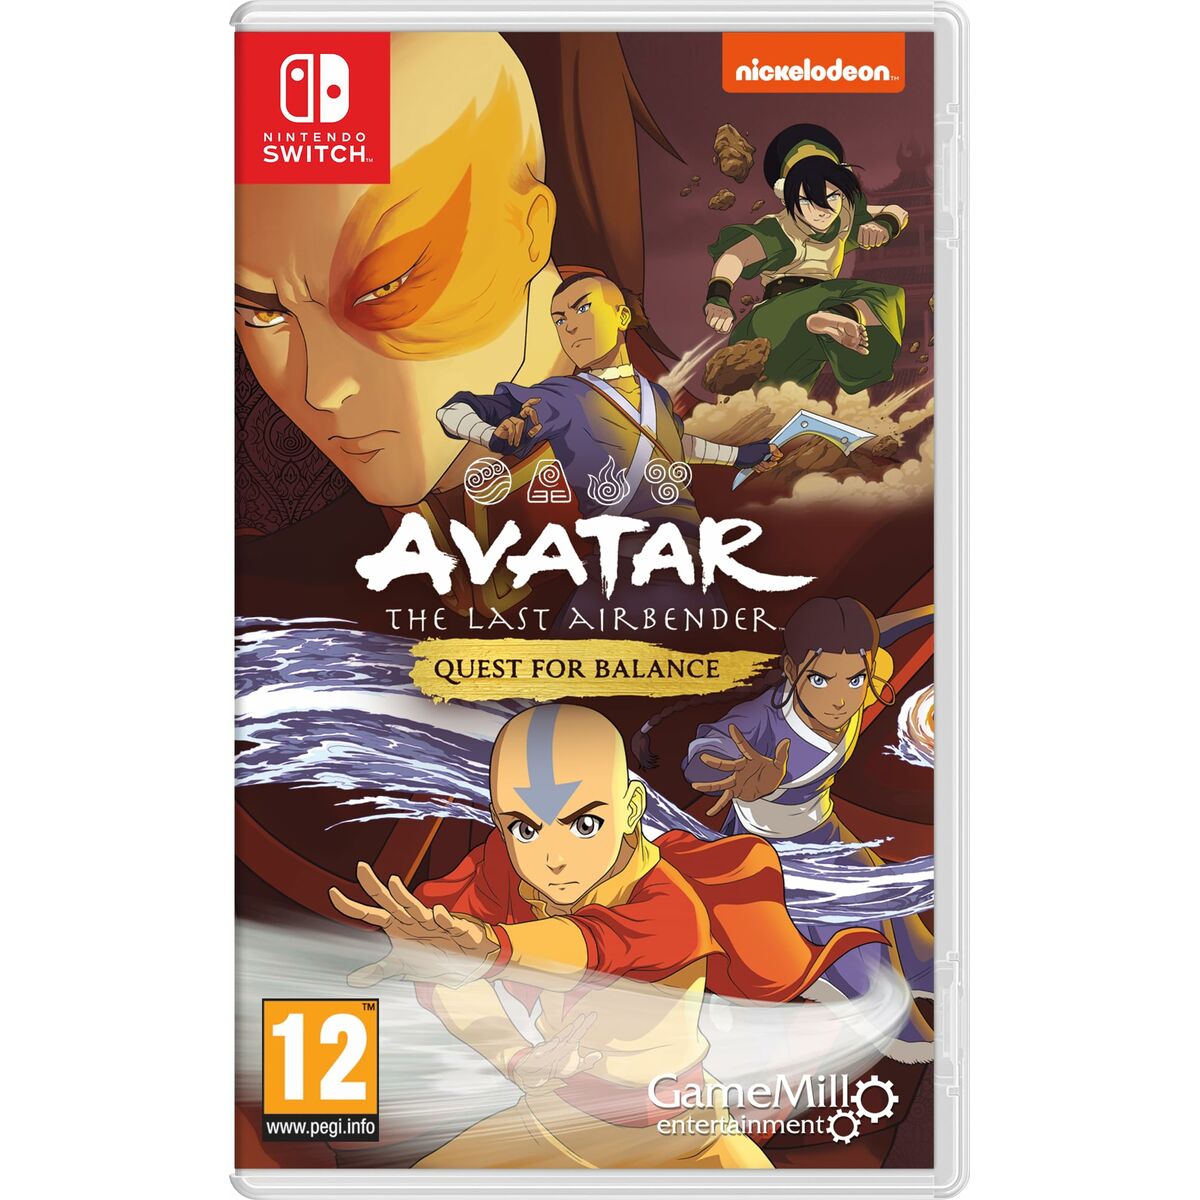 Videogioco per Switch Just For Games Avatar: The last airbender - Quest for balance